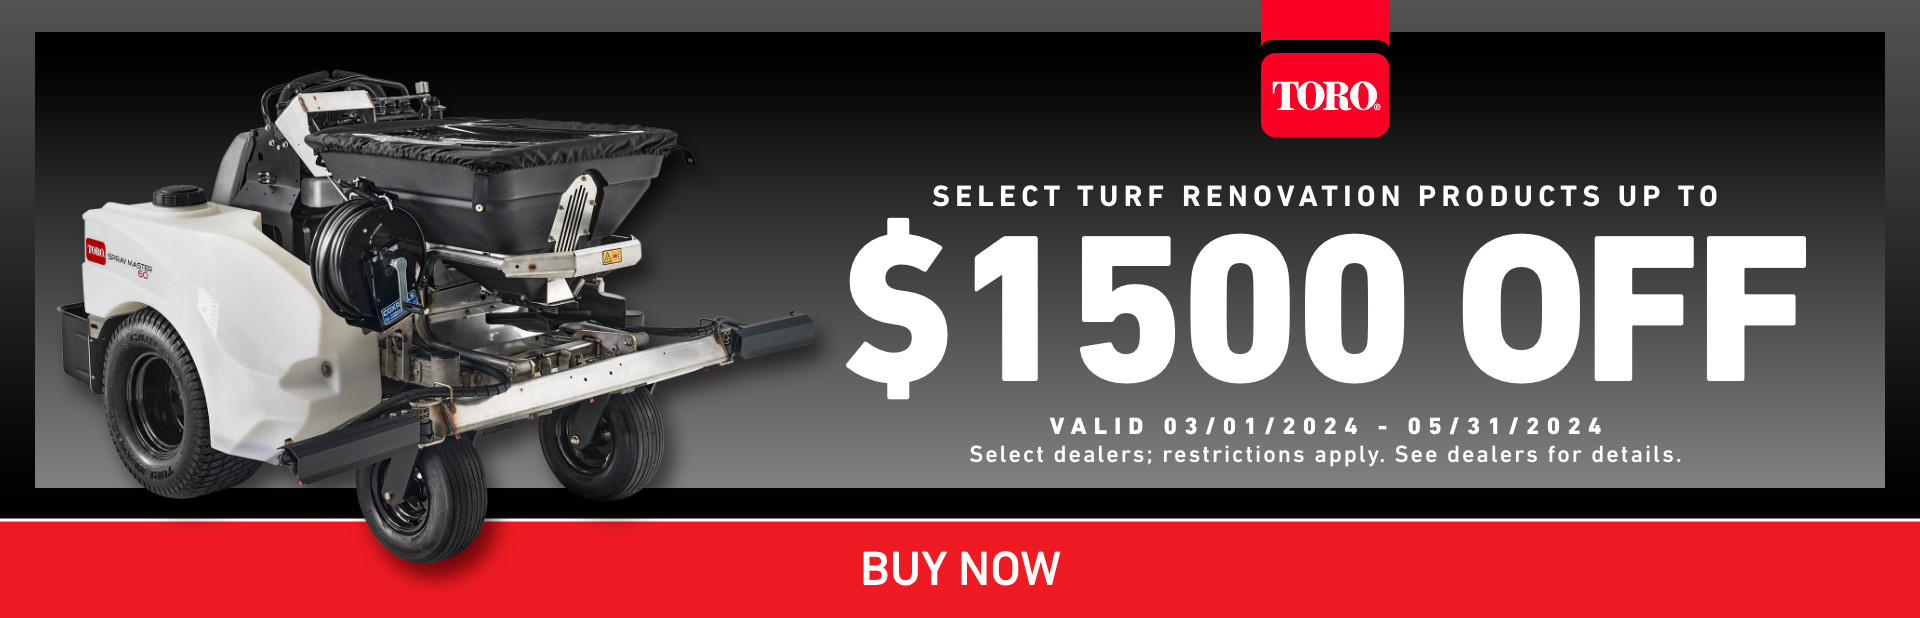 $1500 Off Select Turf Renovation Products